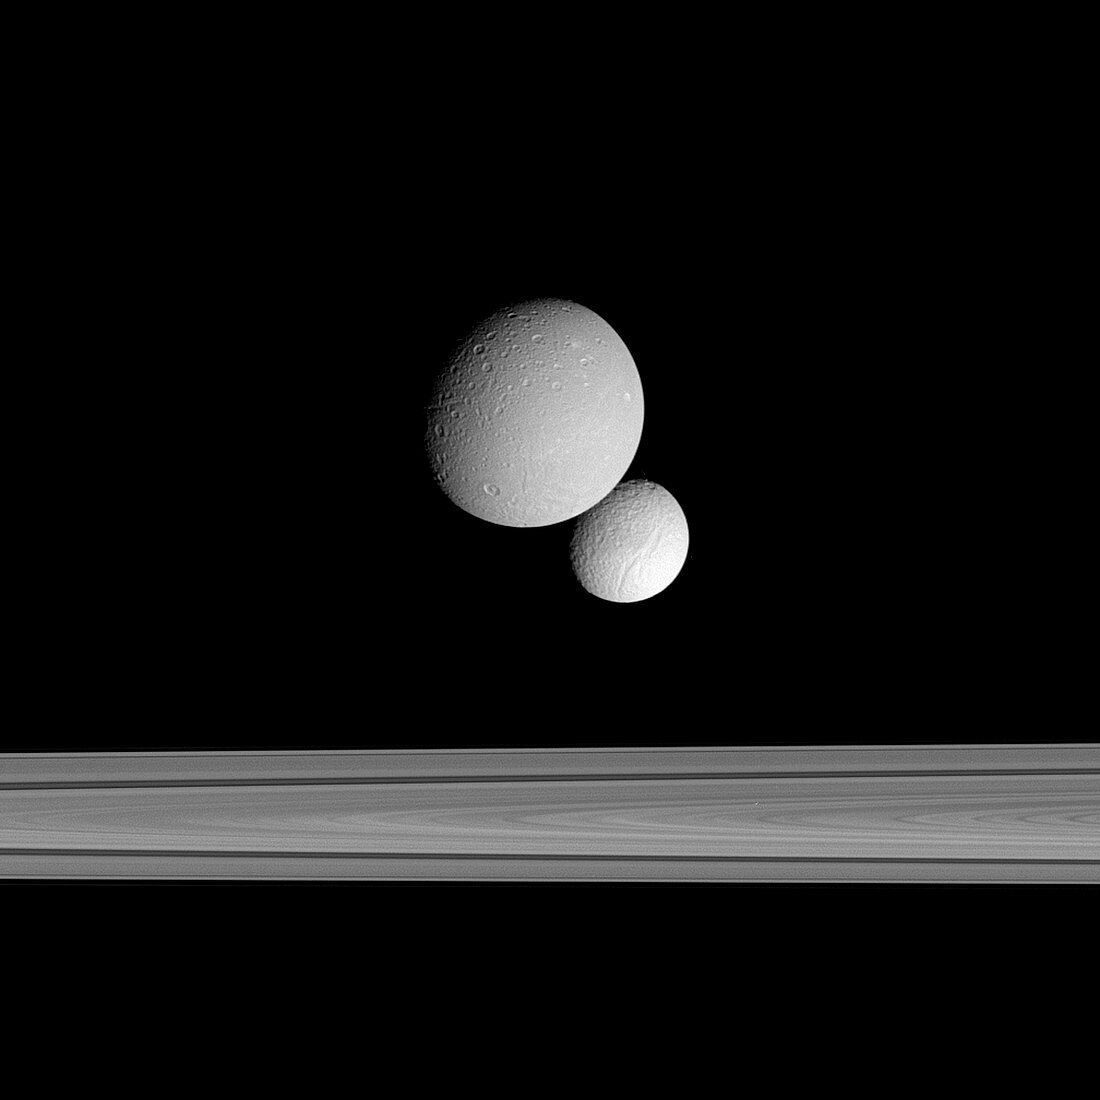 Dione and Tethys,Cassini image